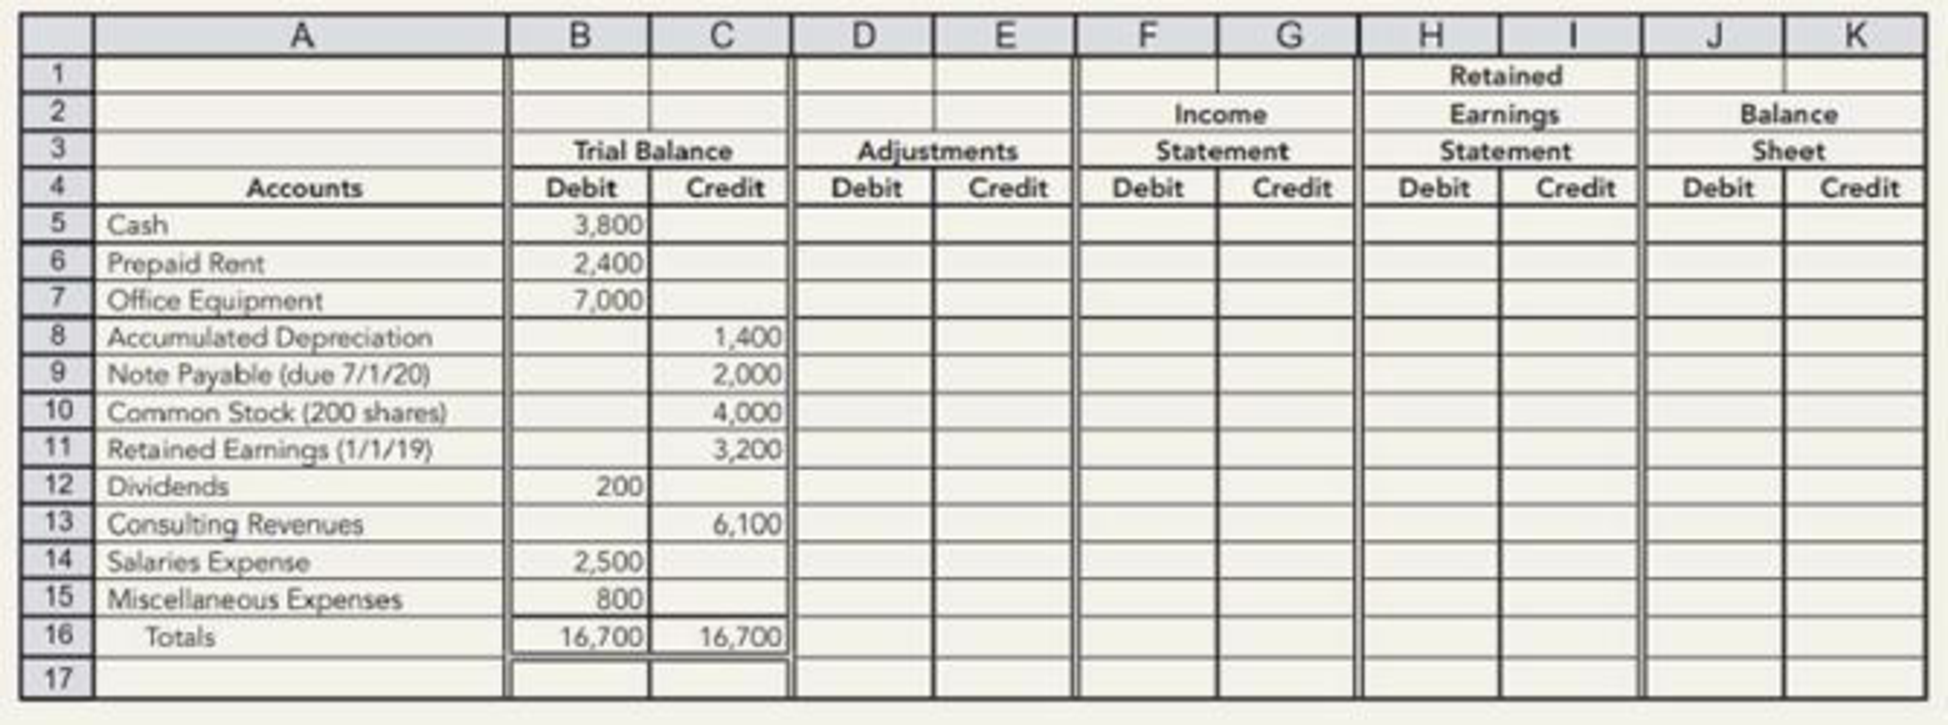 Chapter 3, Problem 11E, Worksheet for Service Company Whitaker Consulting Company has prepared a trial balance on the 